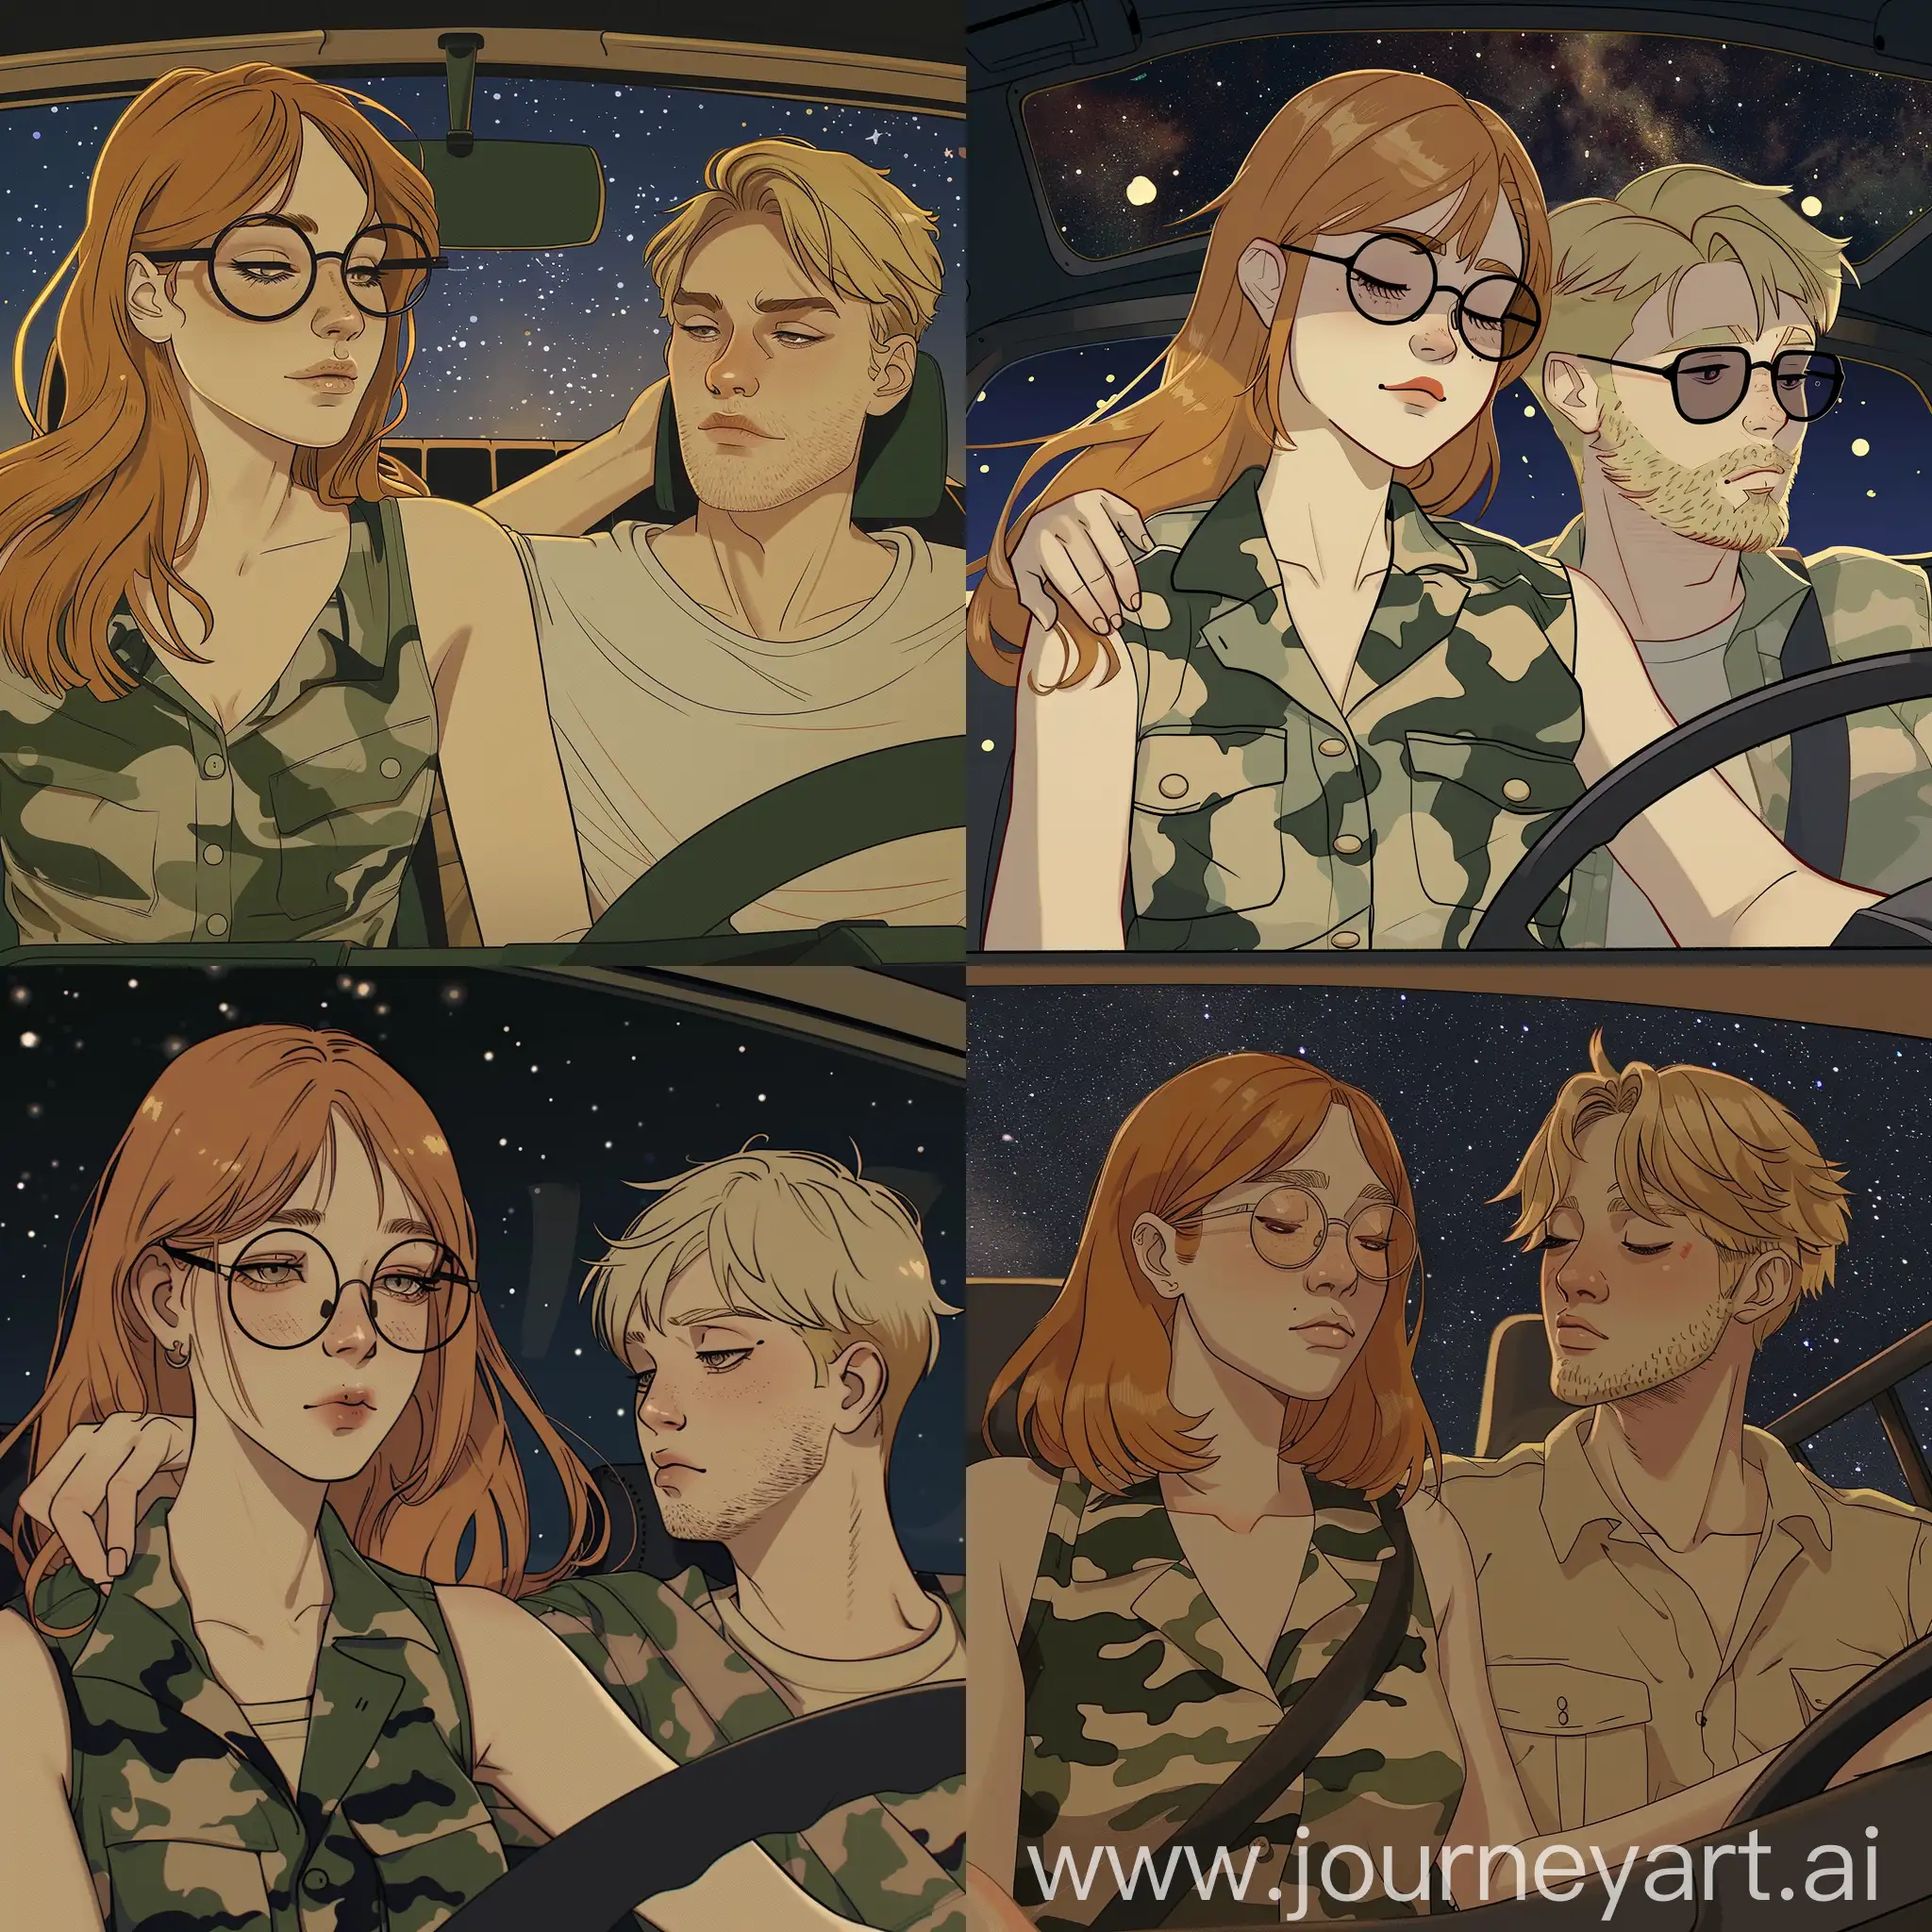 Animation style. A cute young woman, 25 years old, with flowing shoulder length Ginger hair parted in the middle. She is wearing round glasses with thin circle rims. She is wearing a sleeveless green and beige camouflage shirt, and matching camouflage pants.  We are looking at her driving a car, straight on view through the windshield. It is a beautiful starry night. Sitting next to her in the car, is a an attractive man, 25 years old, with blonde hair, a longer nose, and light blonde stubble. He is resting his head on the shoulder of the Ginger haired driver.